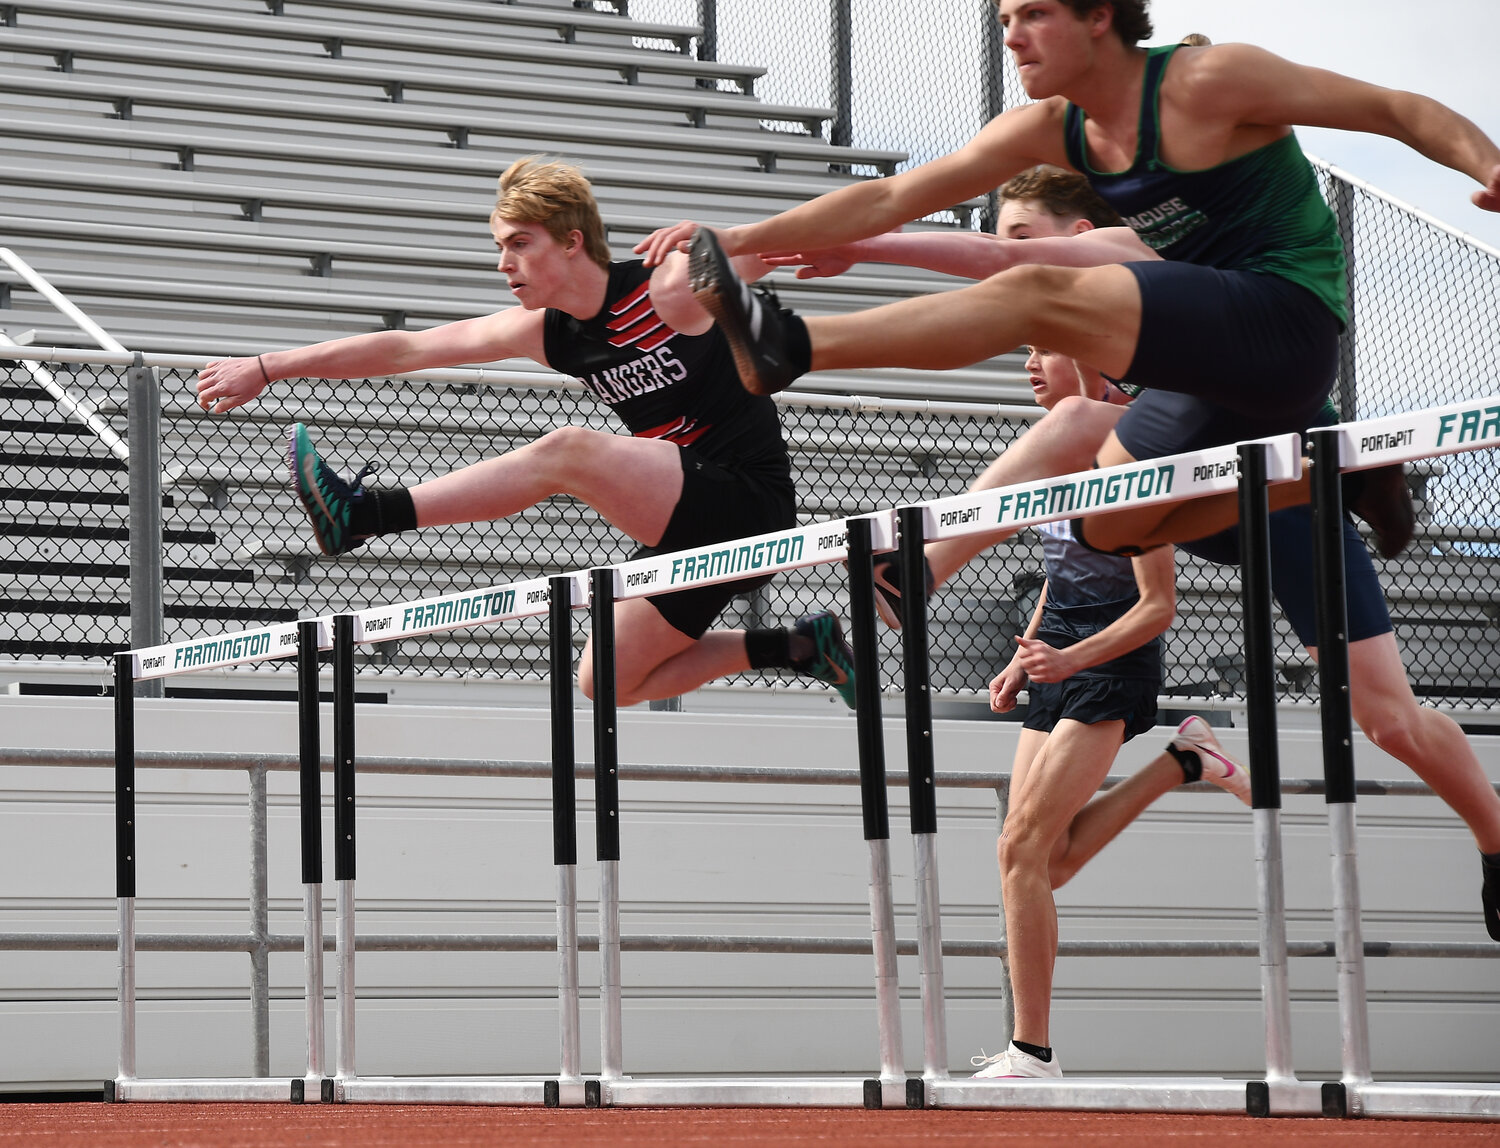 Ranger Colter Krell placed sixth in the 110 hurdles and ninth in the 300 hurdles at Friday’s Meet of Hope in Rock Springs.